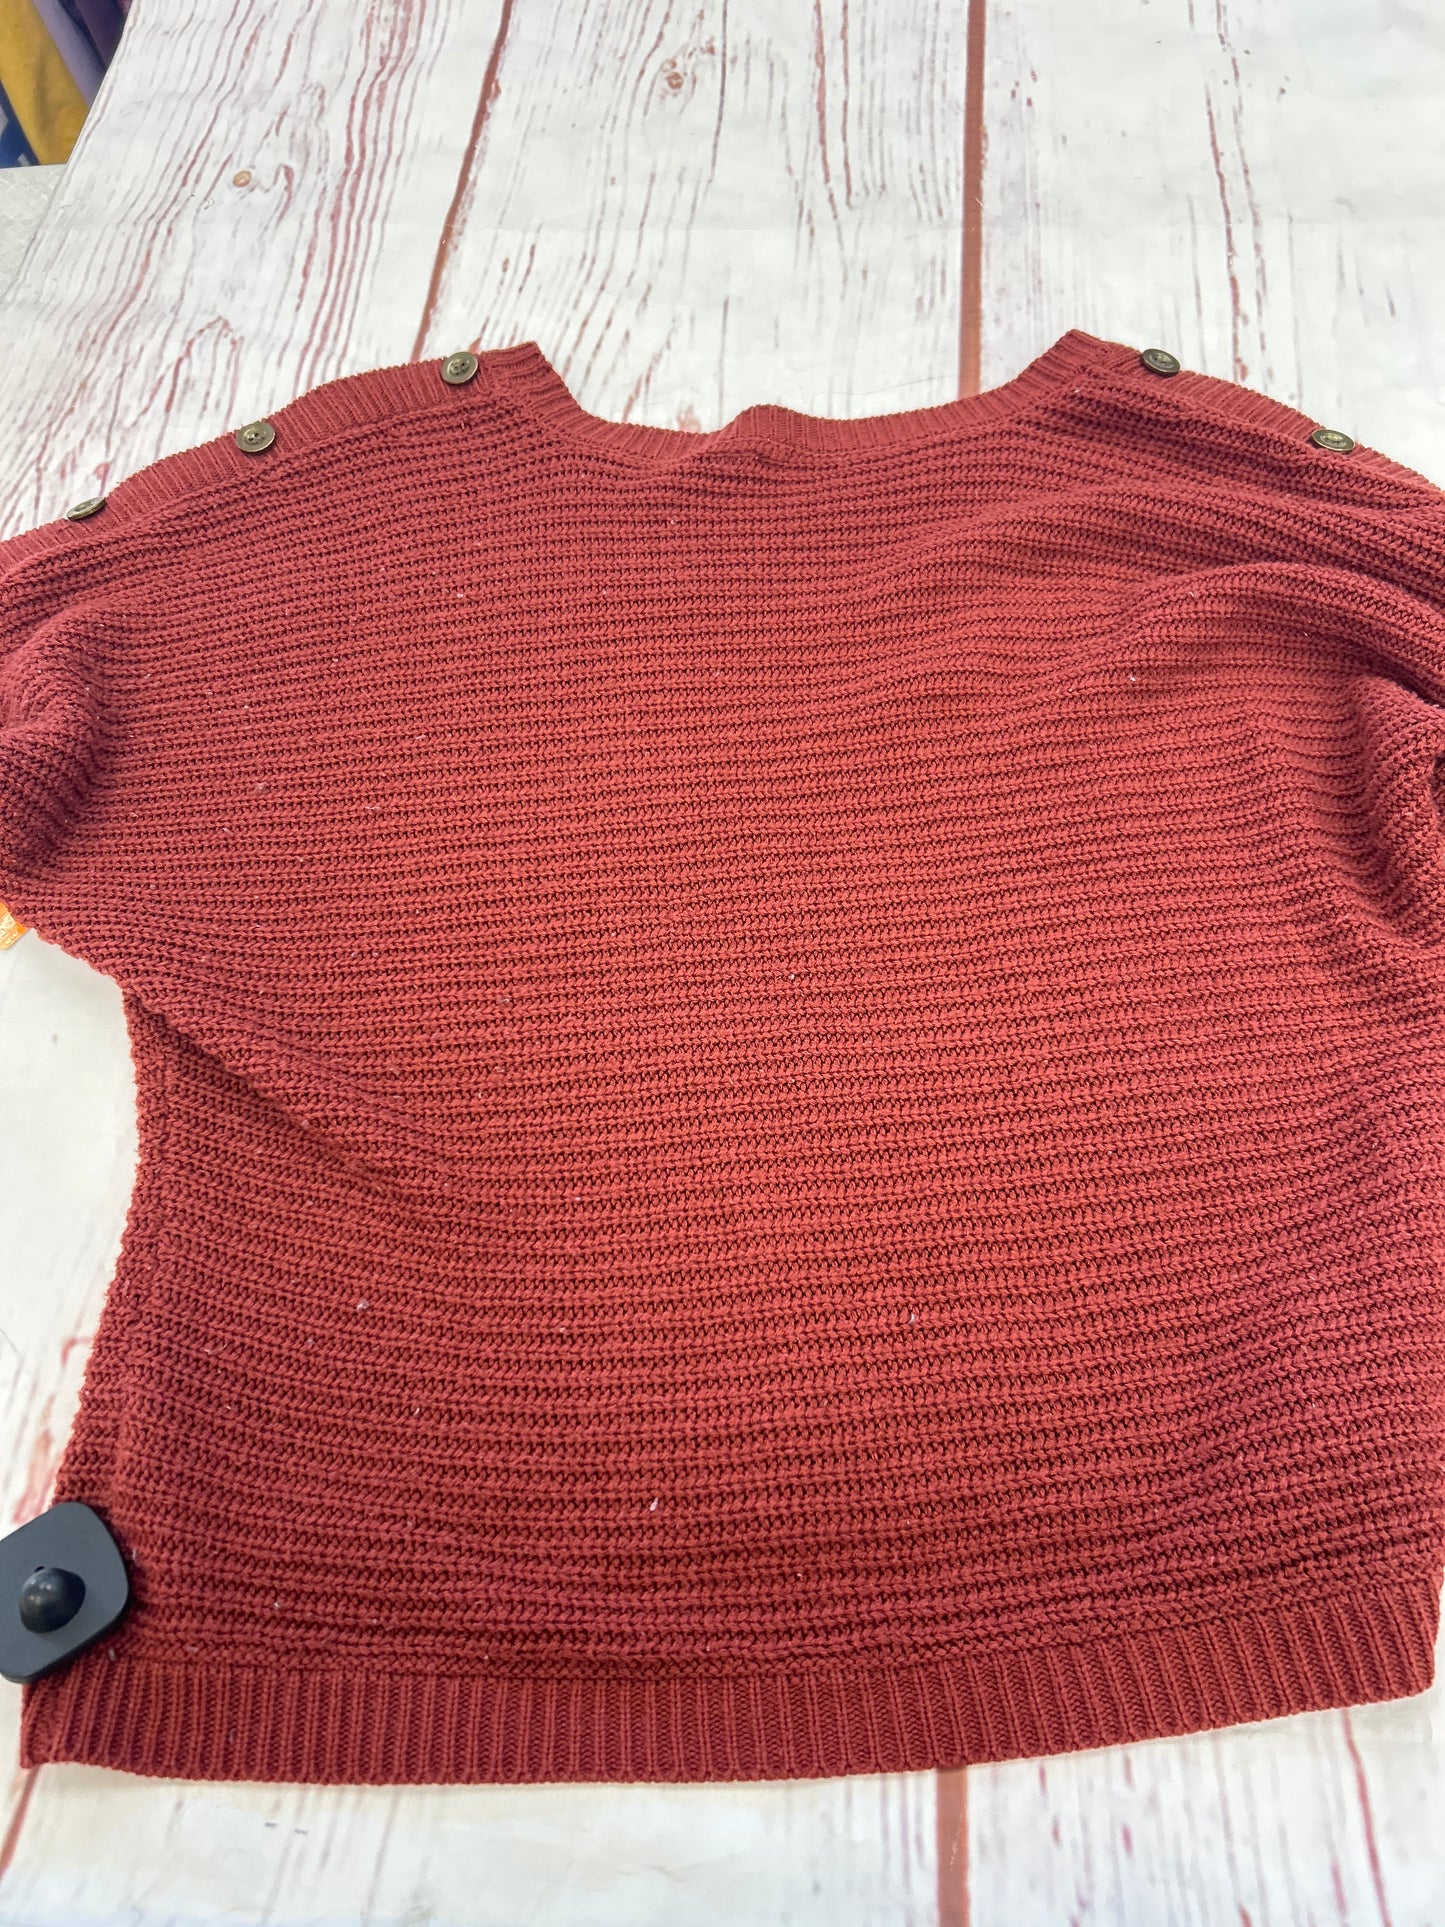 Sweater By Misia  Size: M